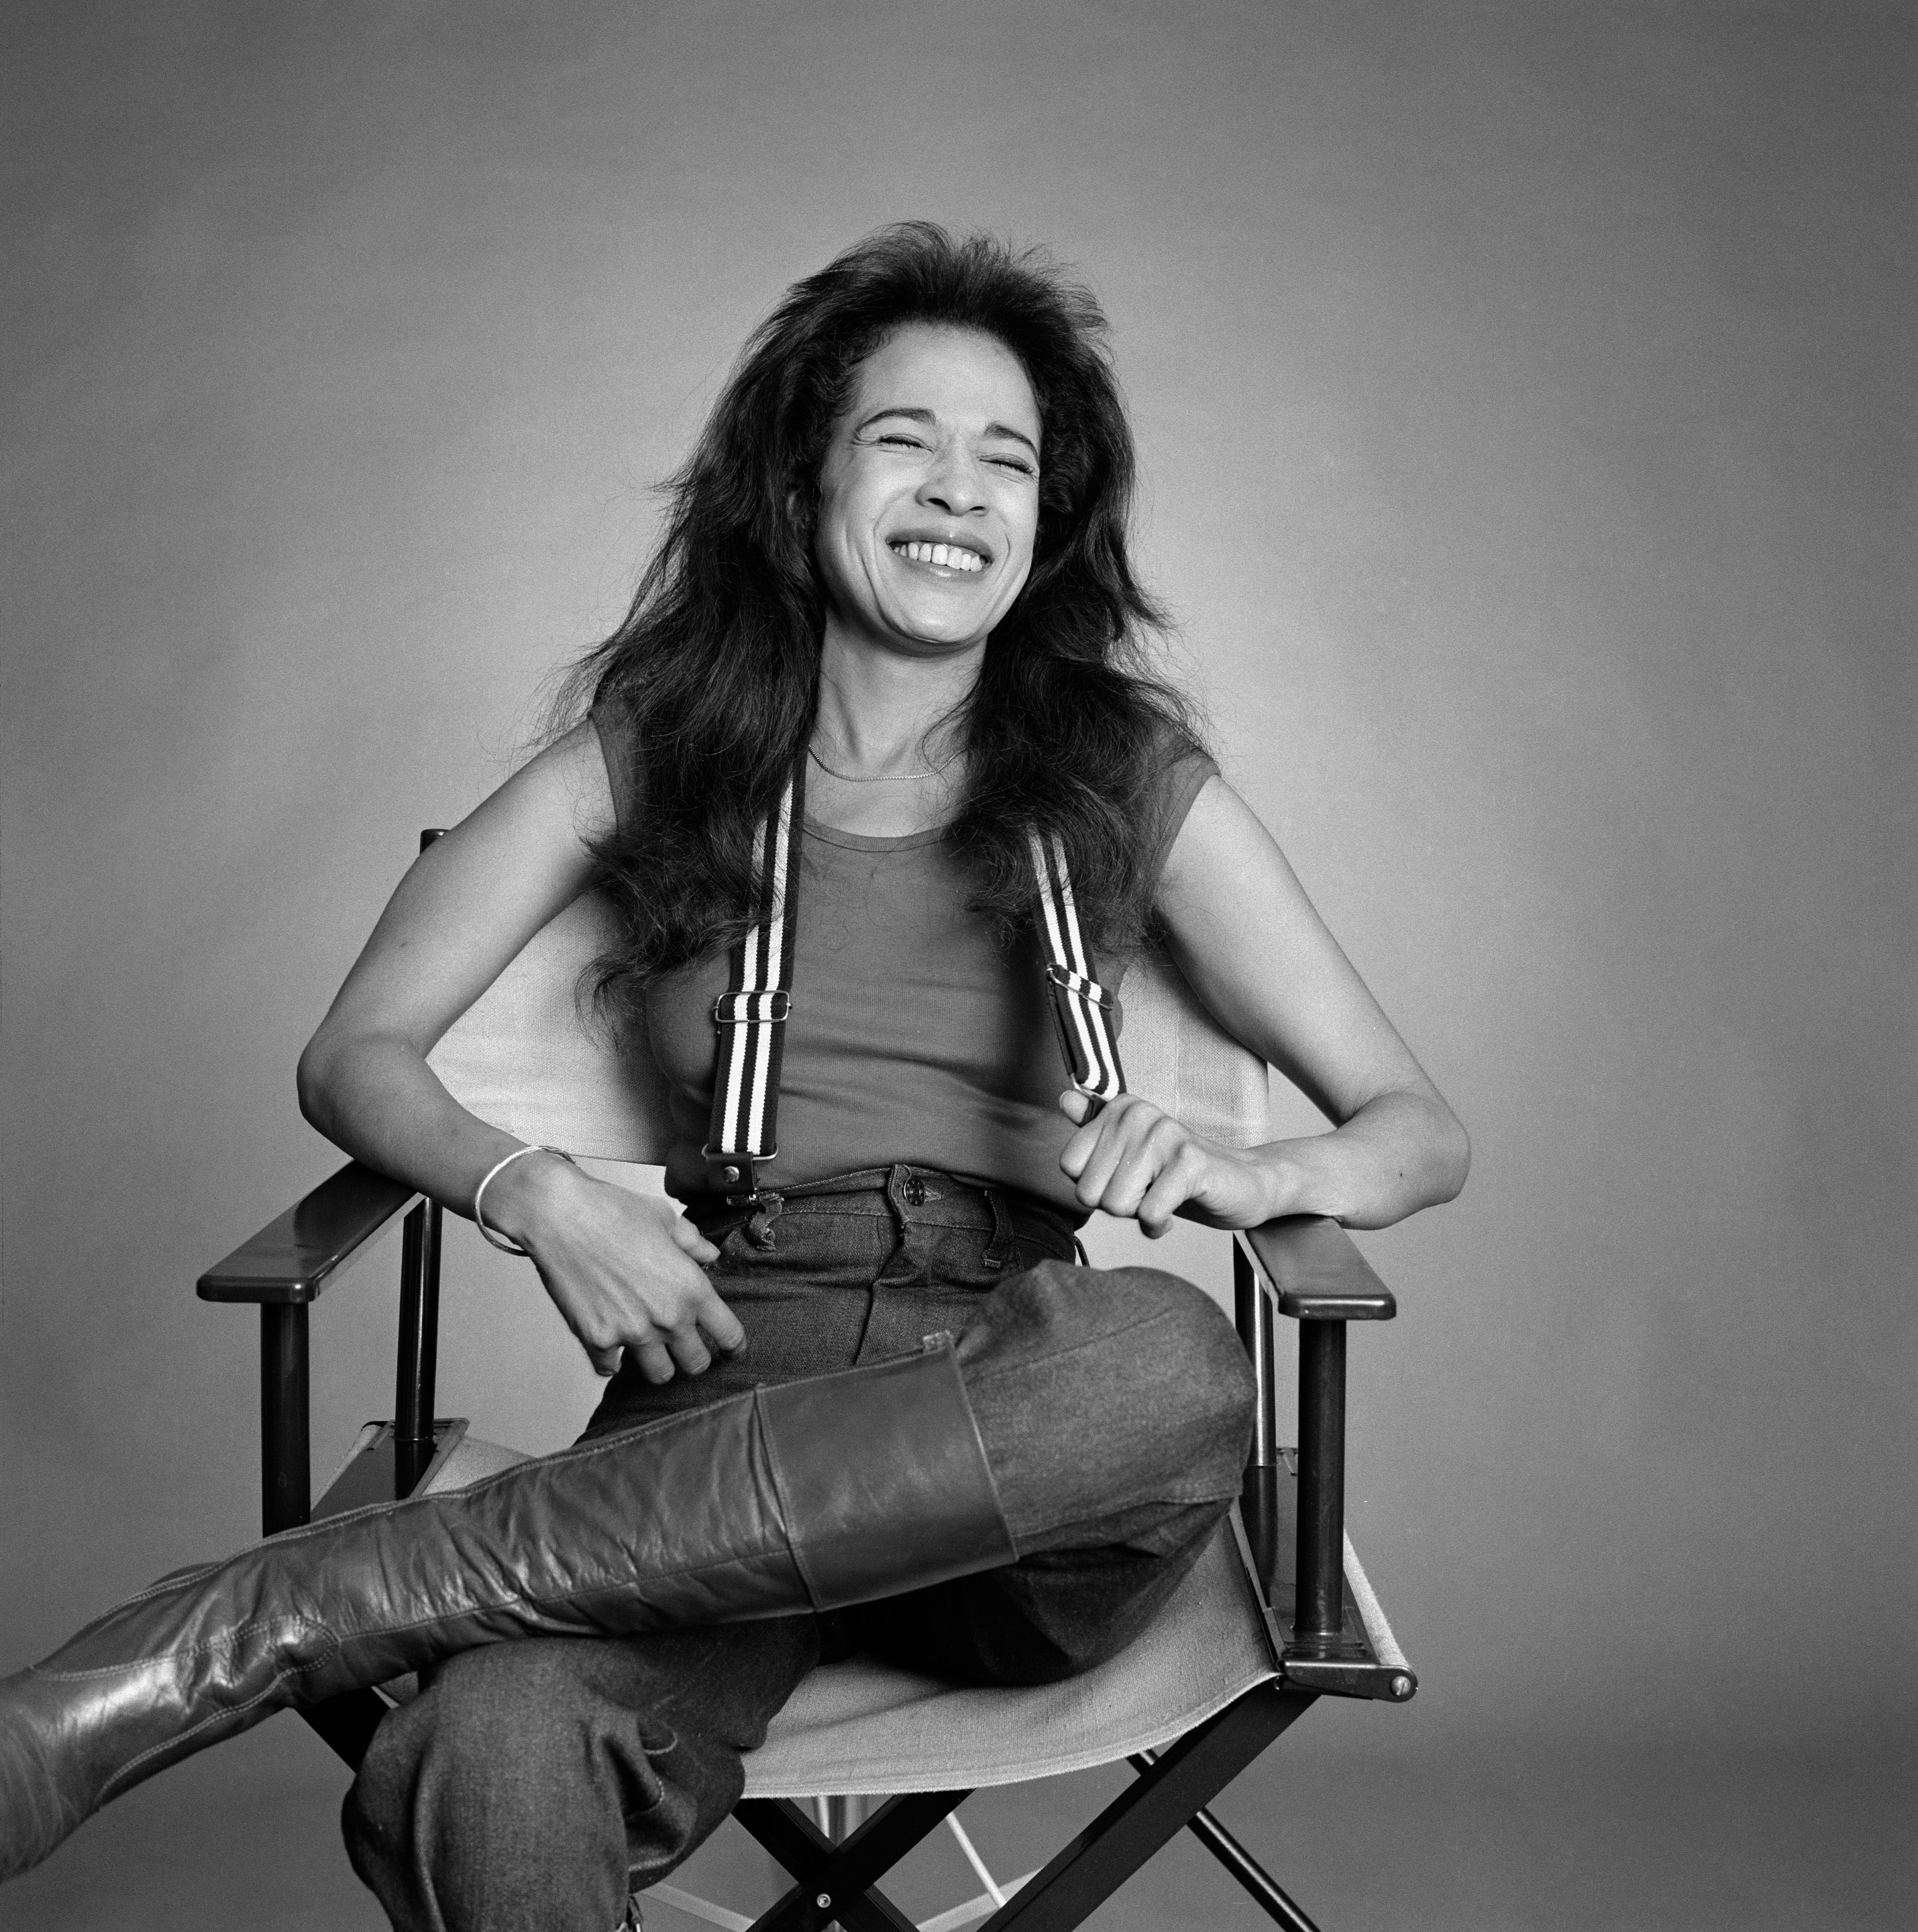 ronnnie spector sitting in a director's chair laughing wear suspenders, jeans and leather boots 1977